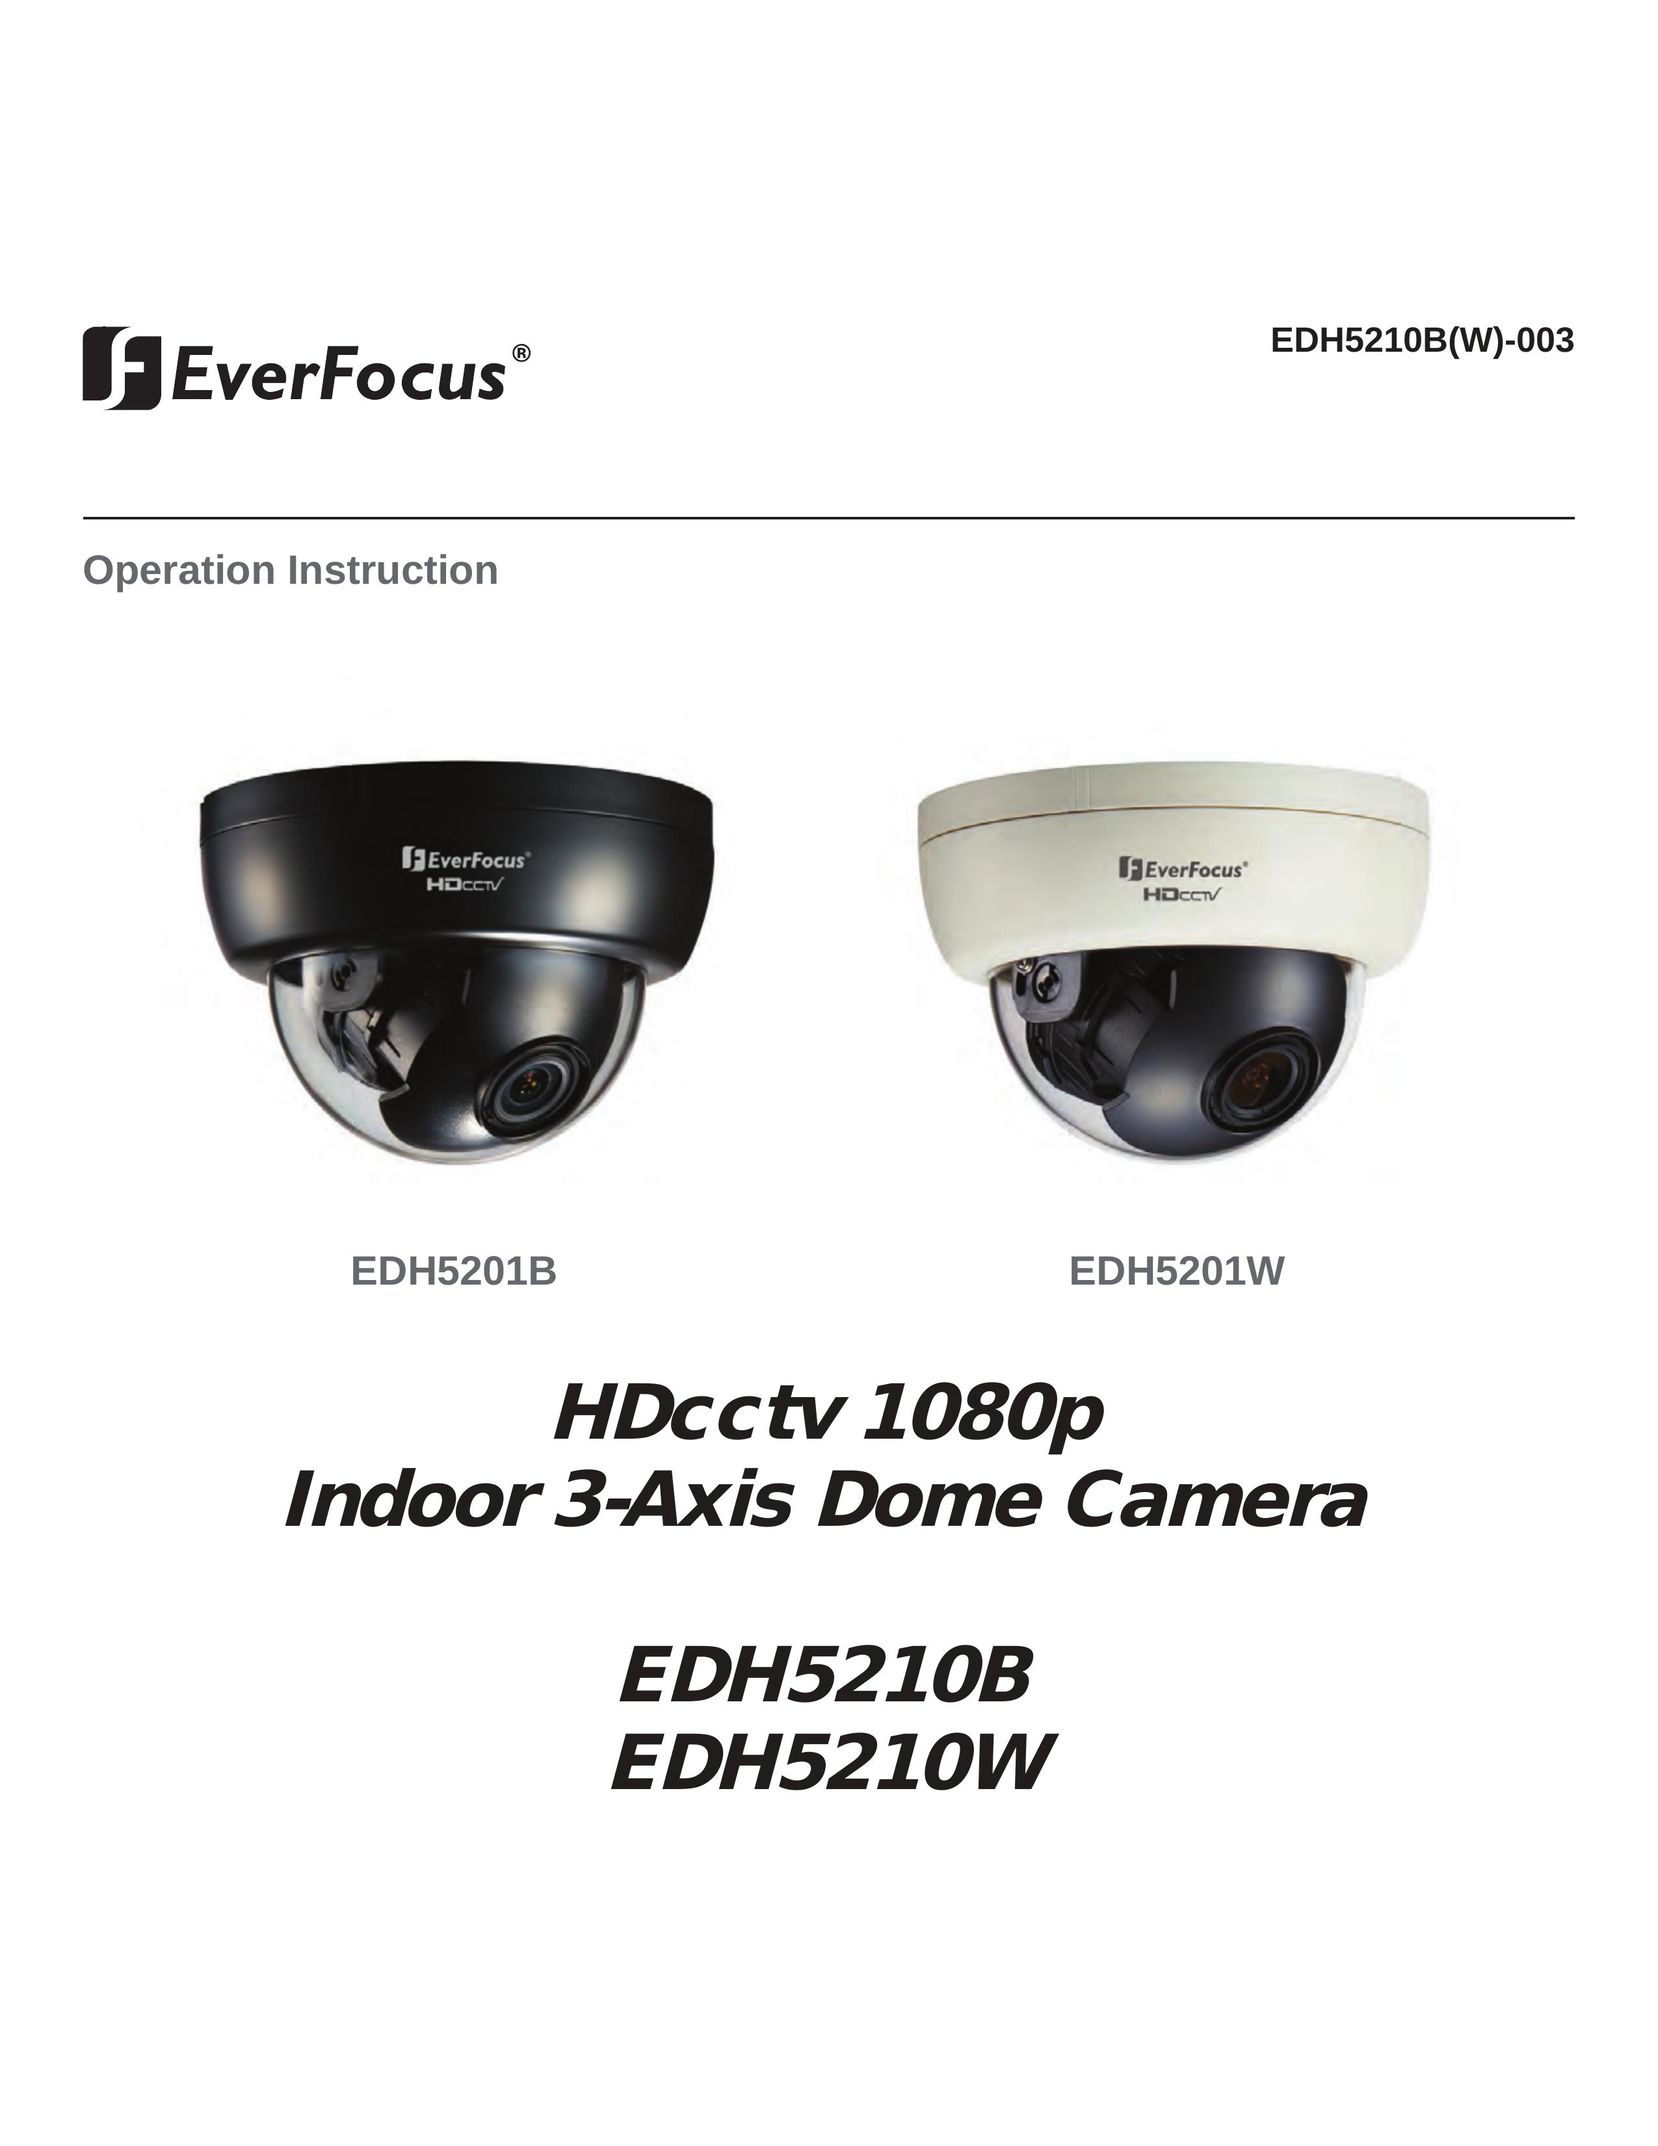 EverFocus EDH5210W Home Security System User Manual